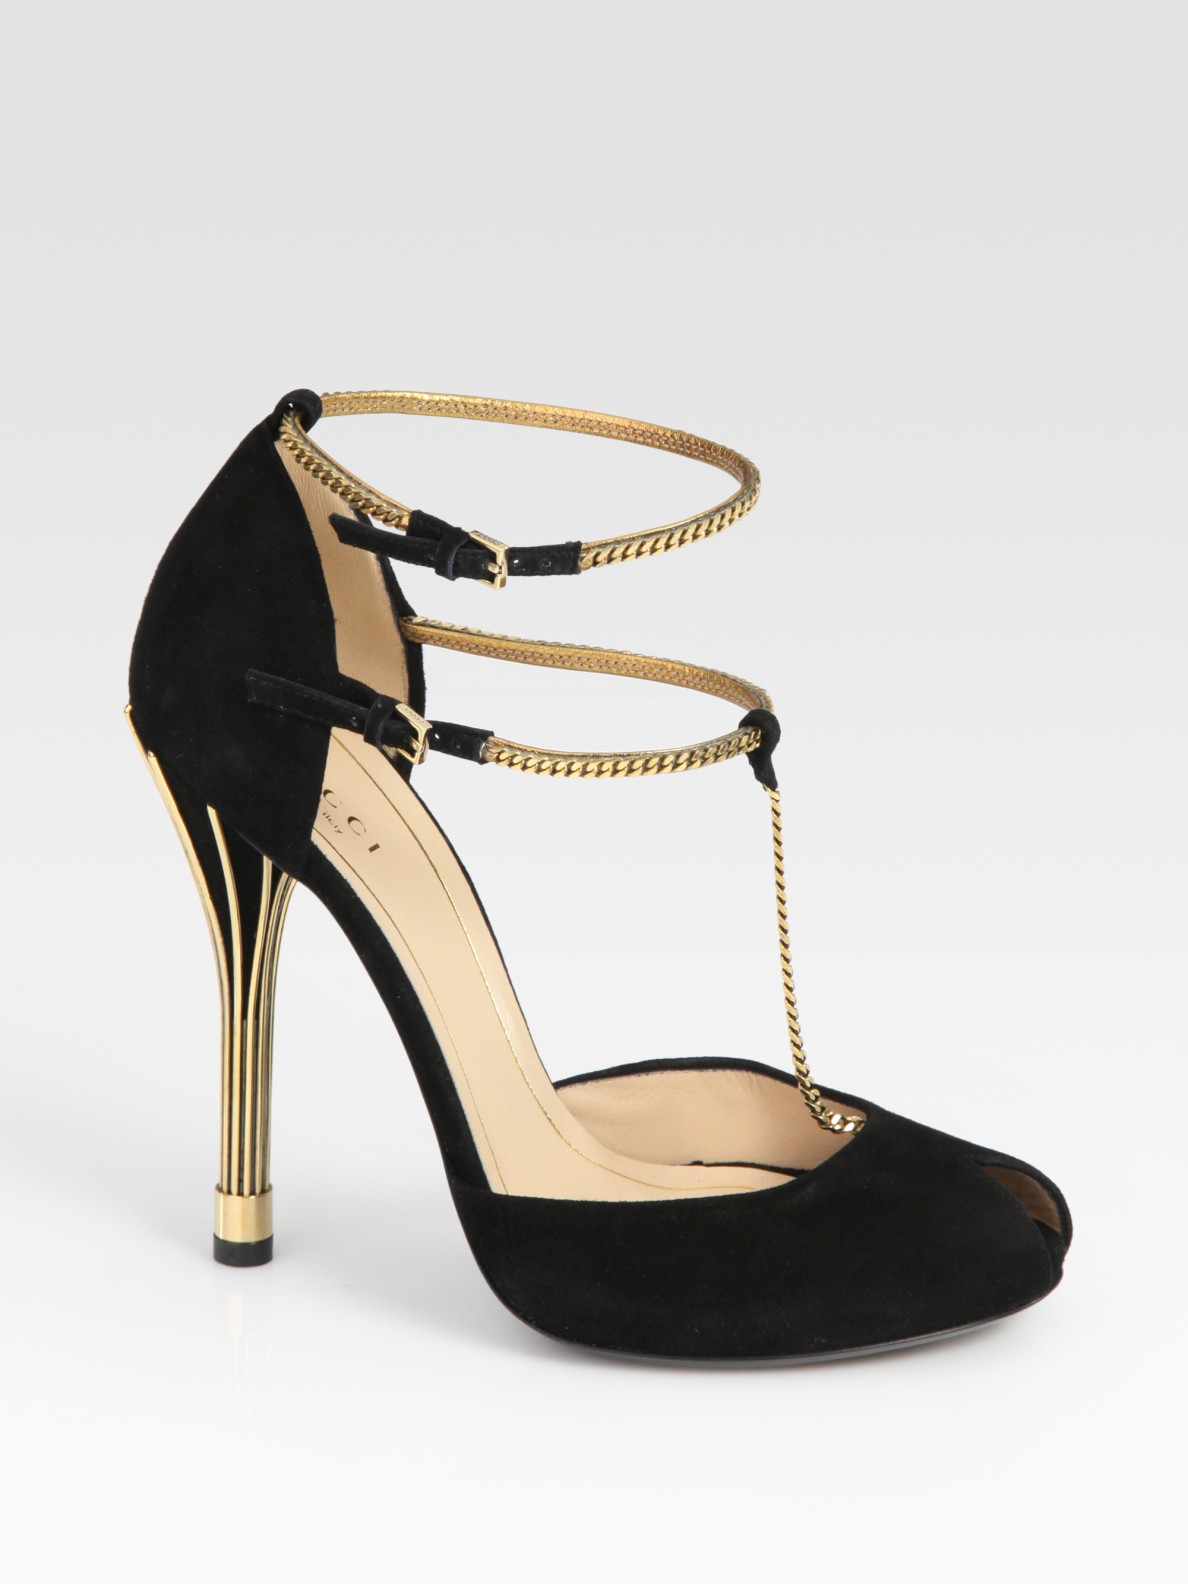 gucci t strap heels, OFF 71%,welcome to 